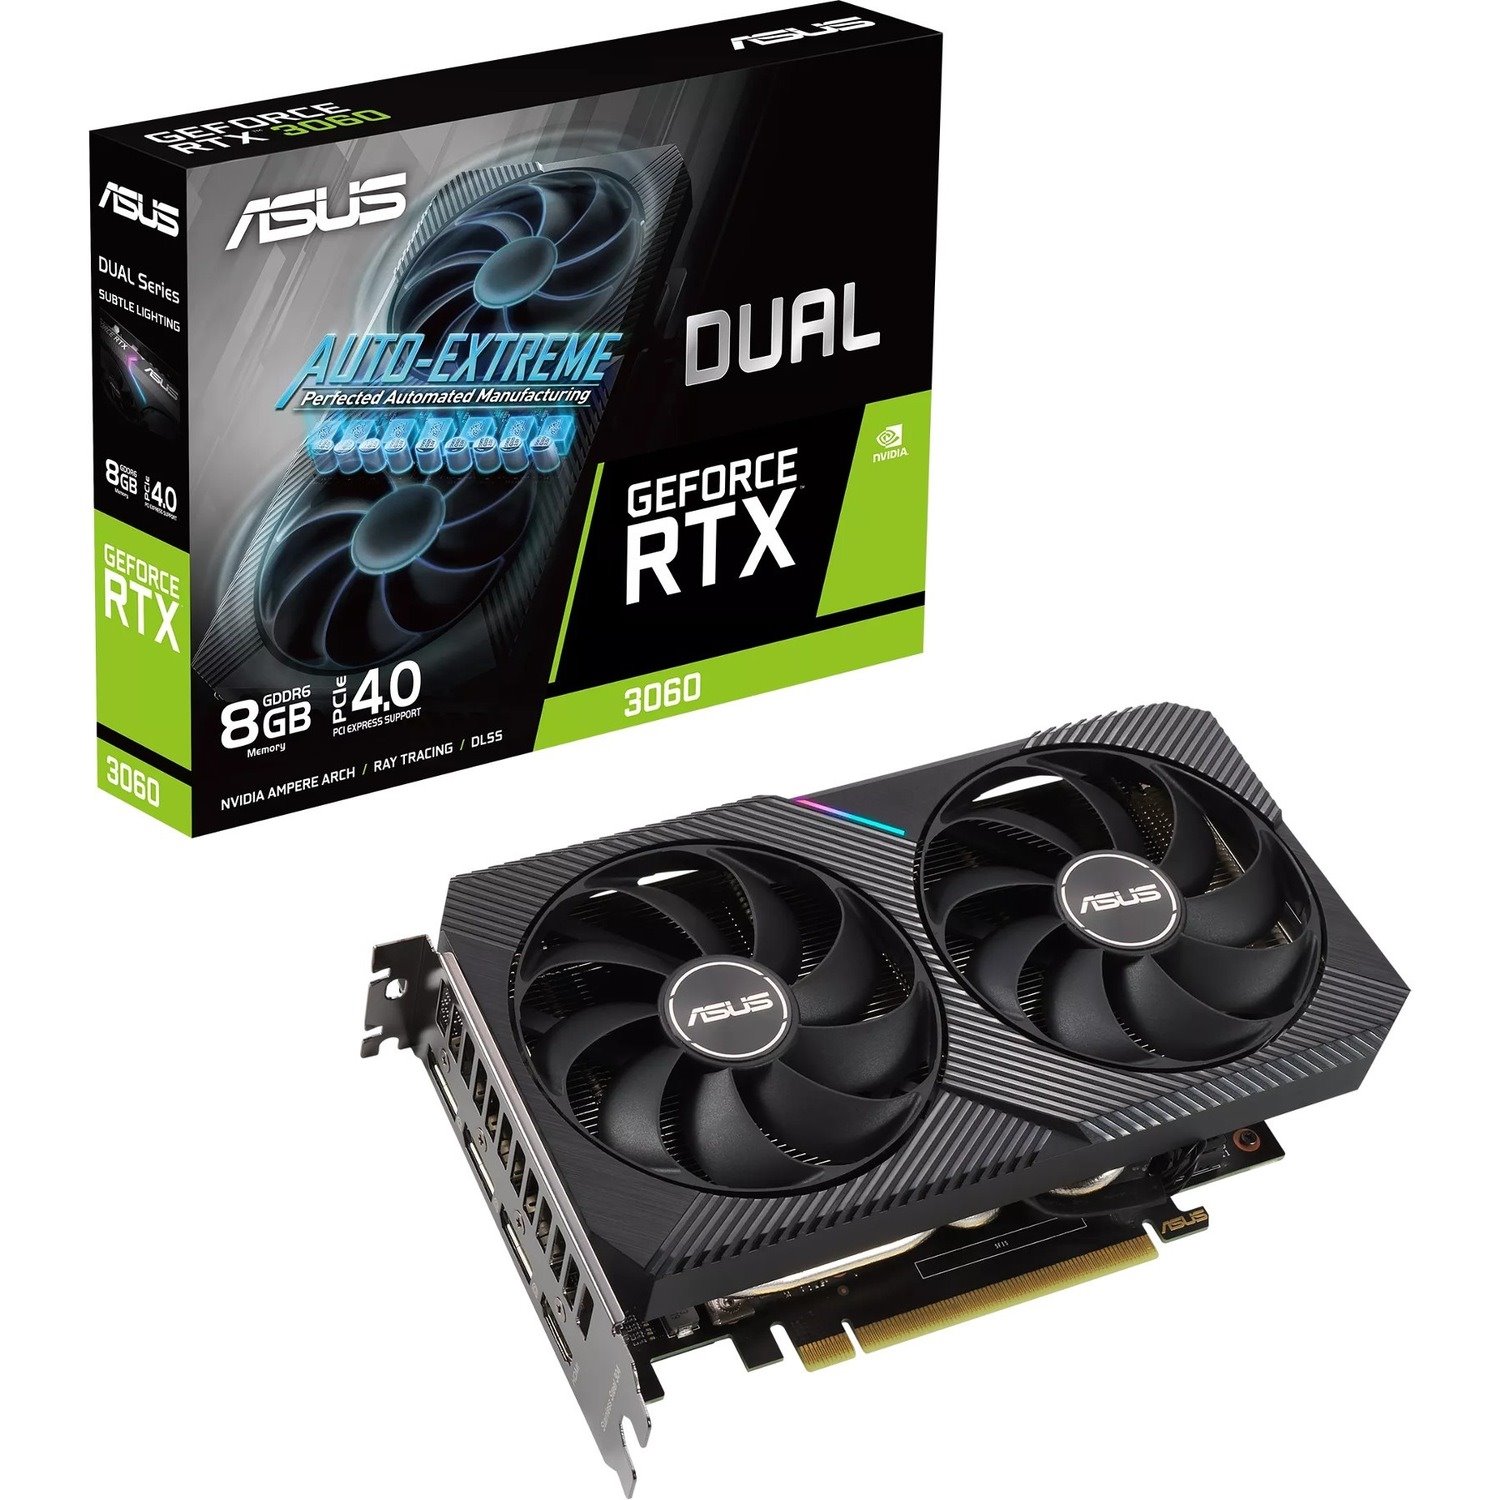 Asus NVIDIA GeForce RTX 3060 Graphic Card - 8 GB GDDR6